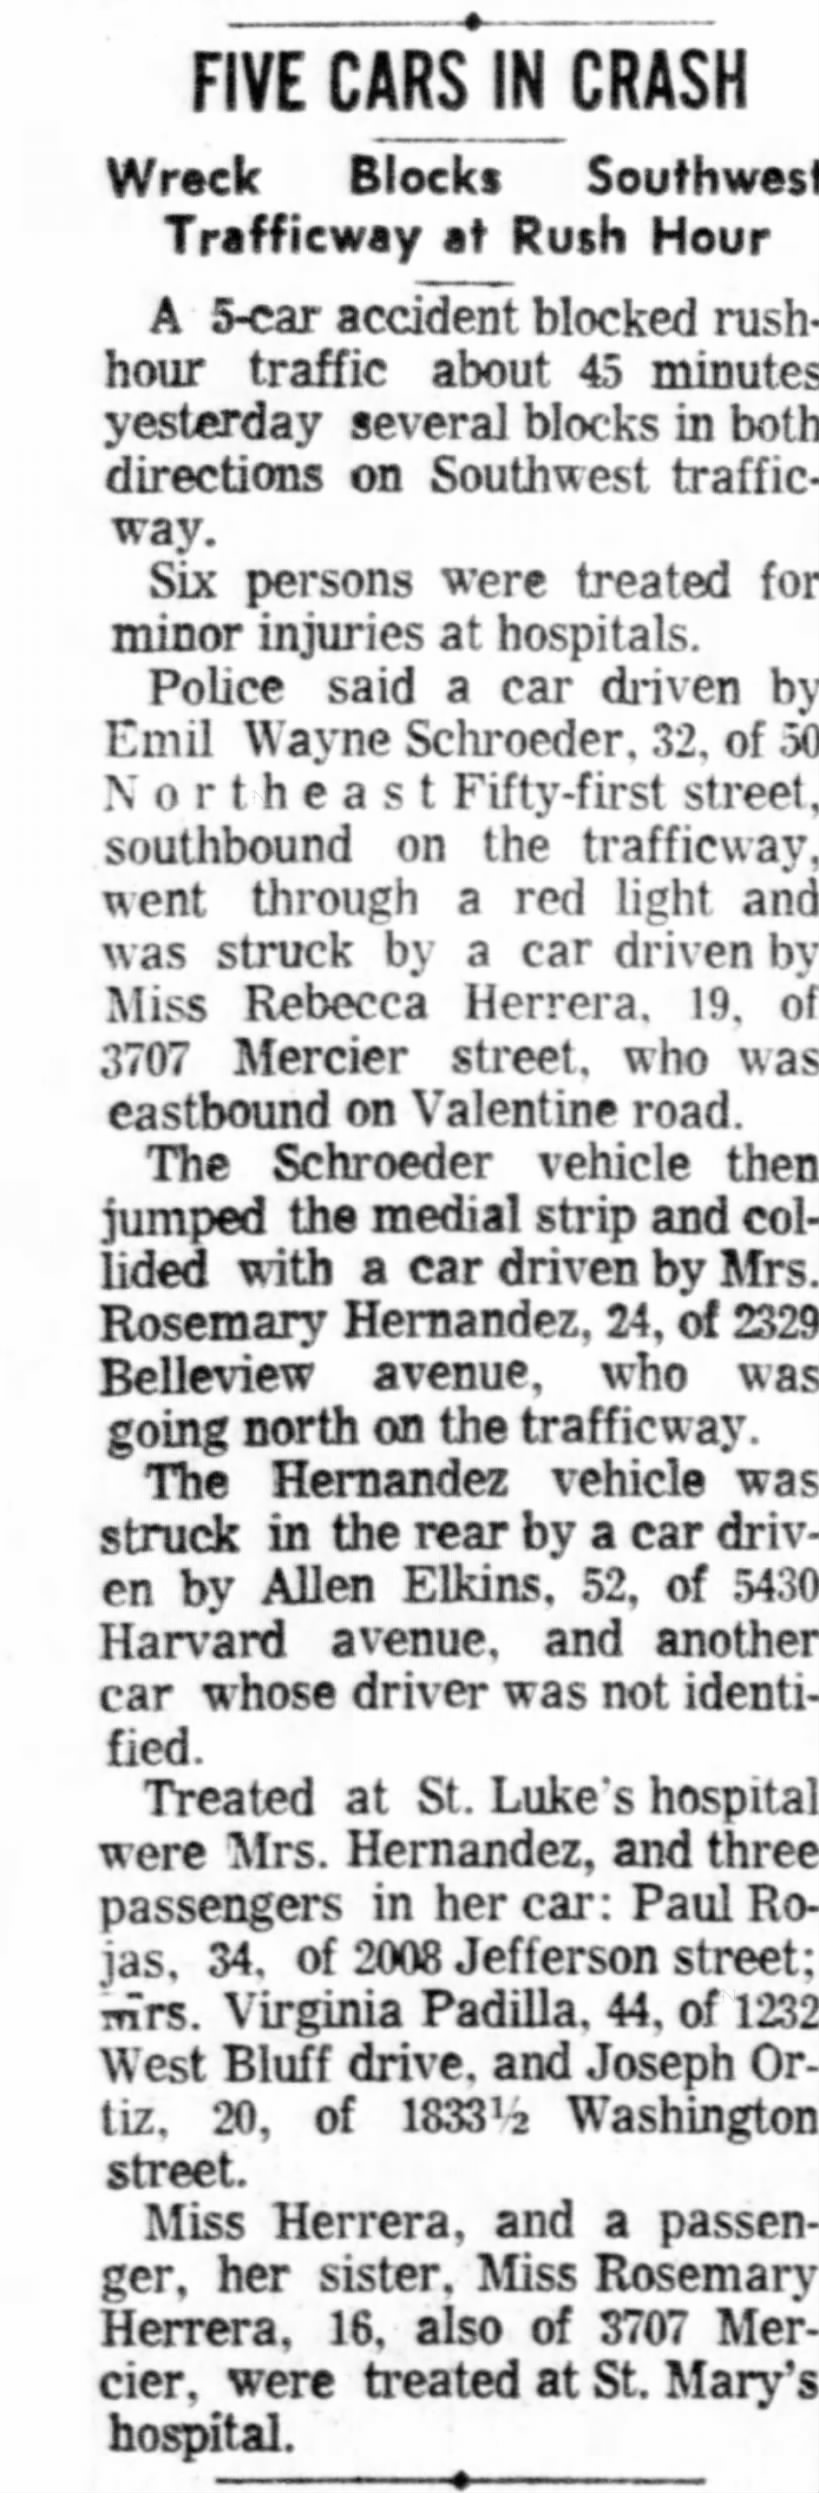 Rojas, Paul - Car Accident - June 1970 - KC Times (MO), page 14.